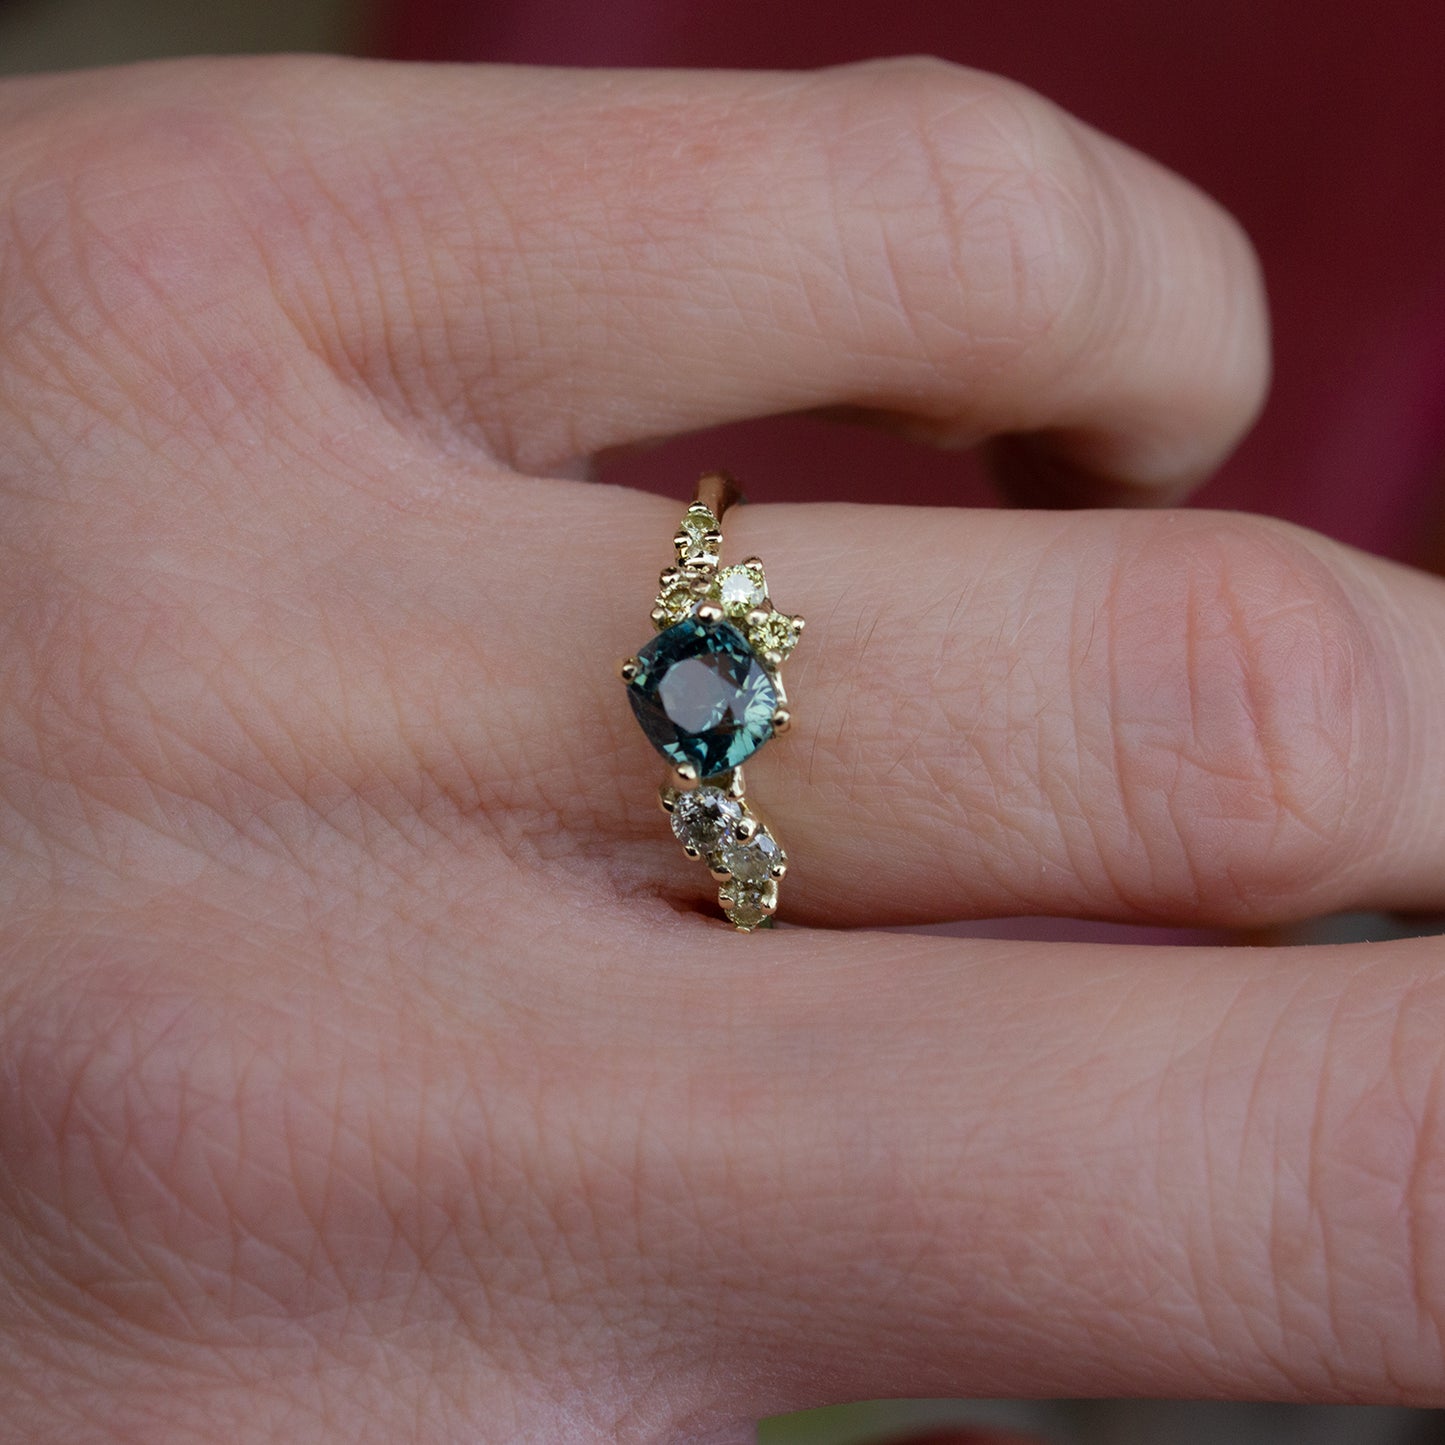 Beautiful and delicate alternative engagement ring featuring cushion cut teal green Montana sapphire flanked by yellow diamonds gently scattered along the band. Resembling first flower buds this ring was inspired by.